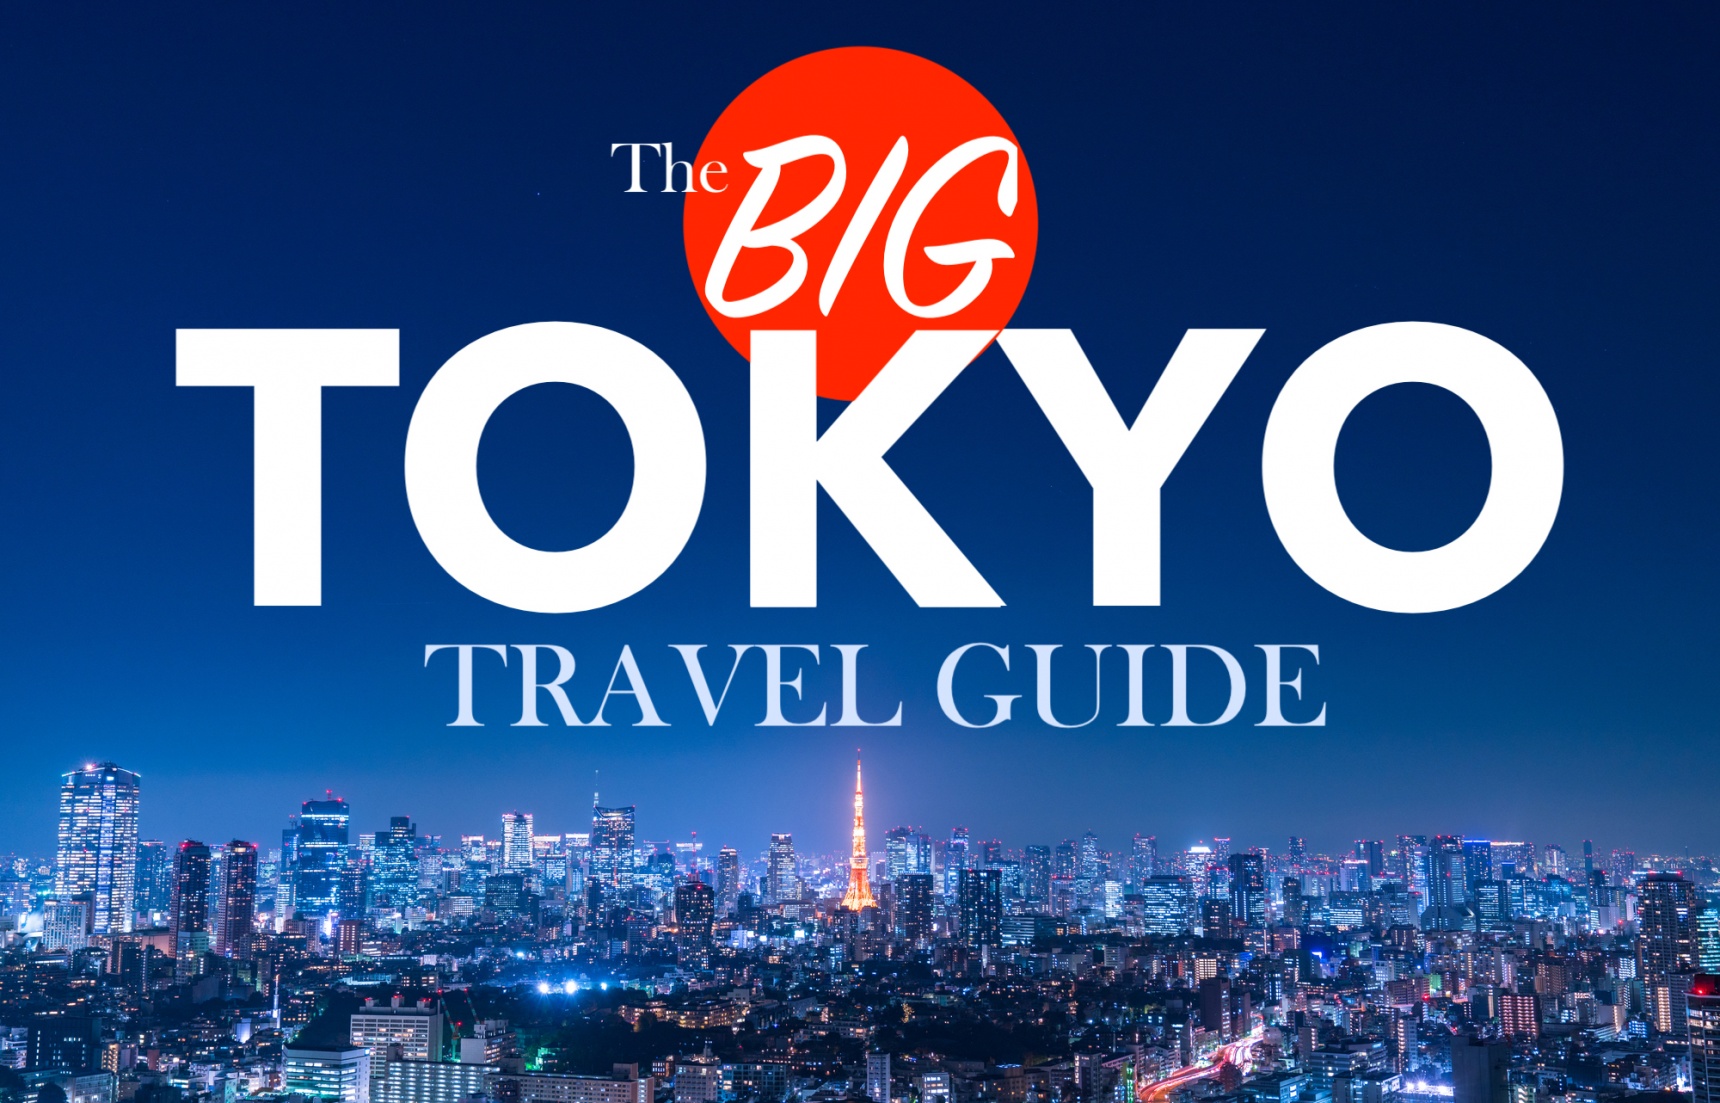 The Big Tokyo Travel Guide